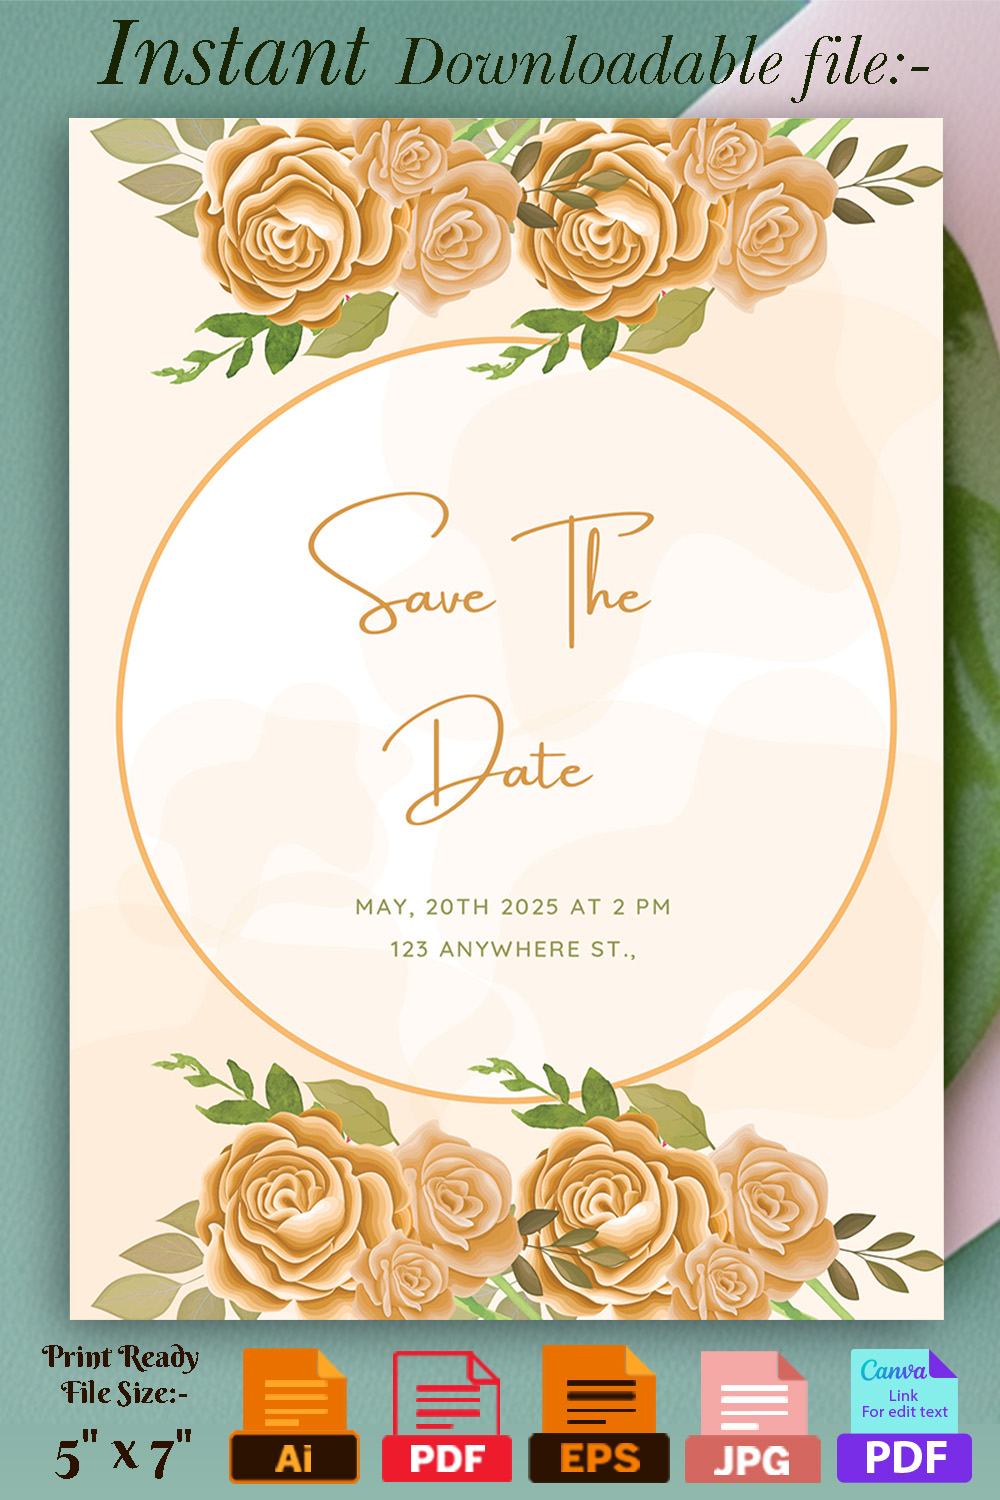 Image with irresistible wedding invitation card with golden roses and leaves.